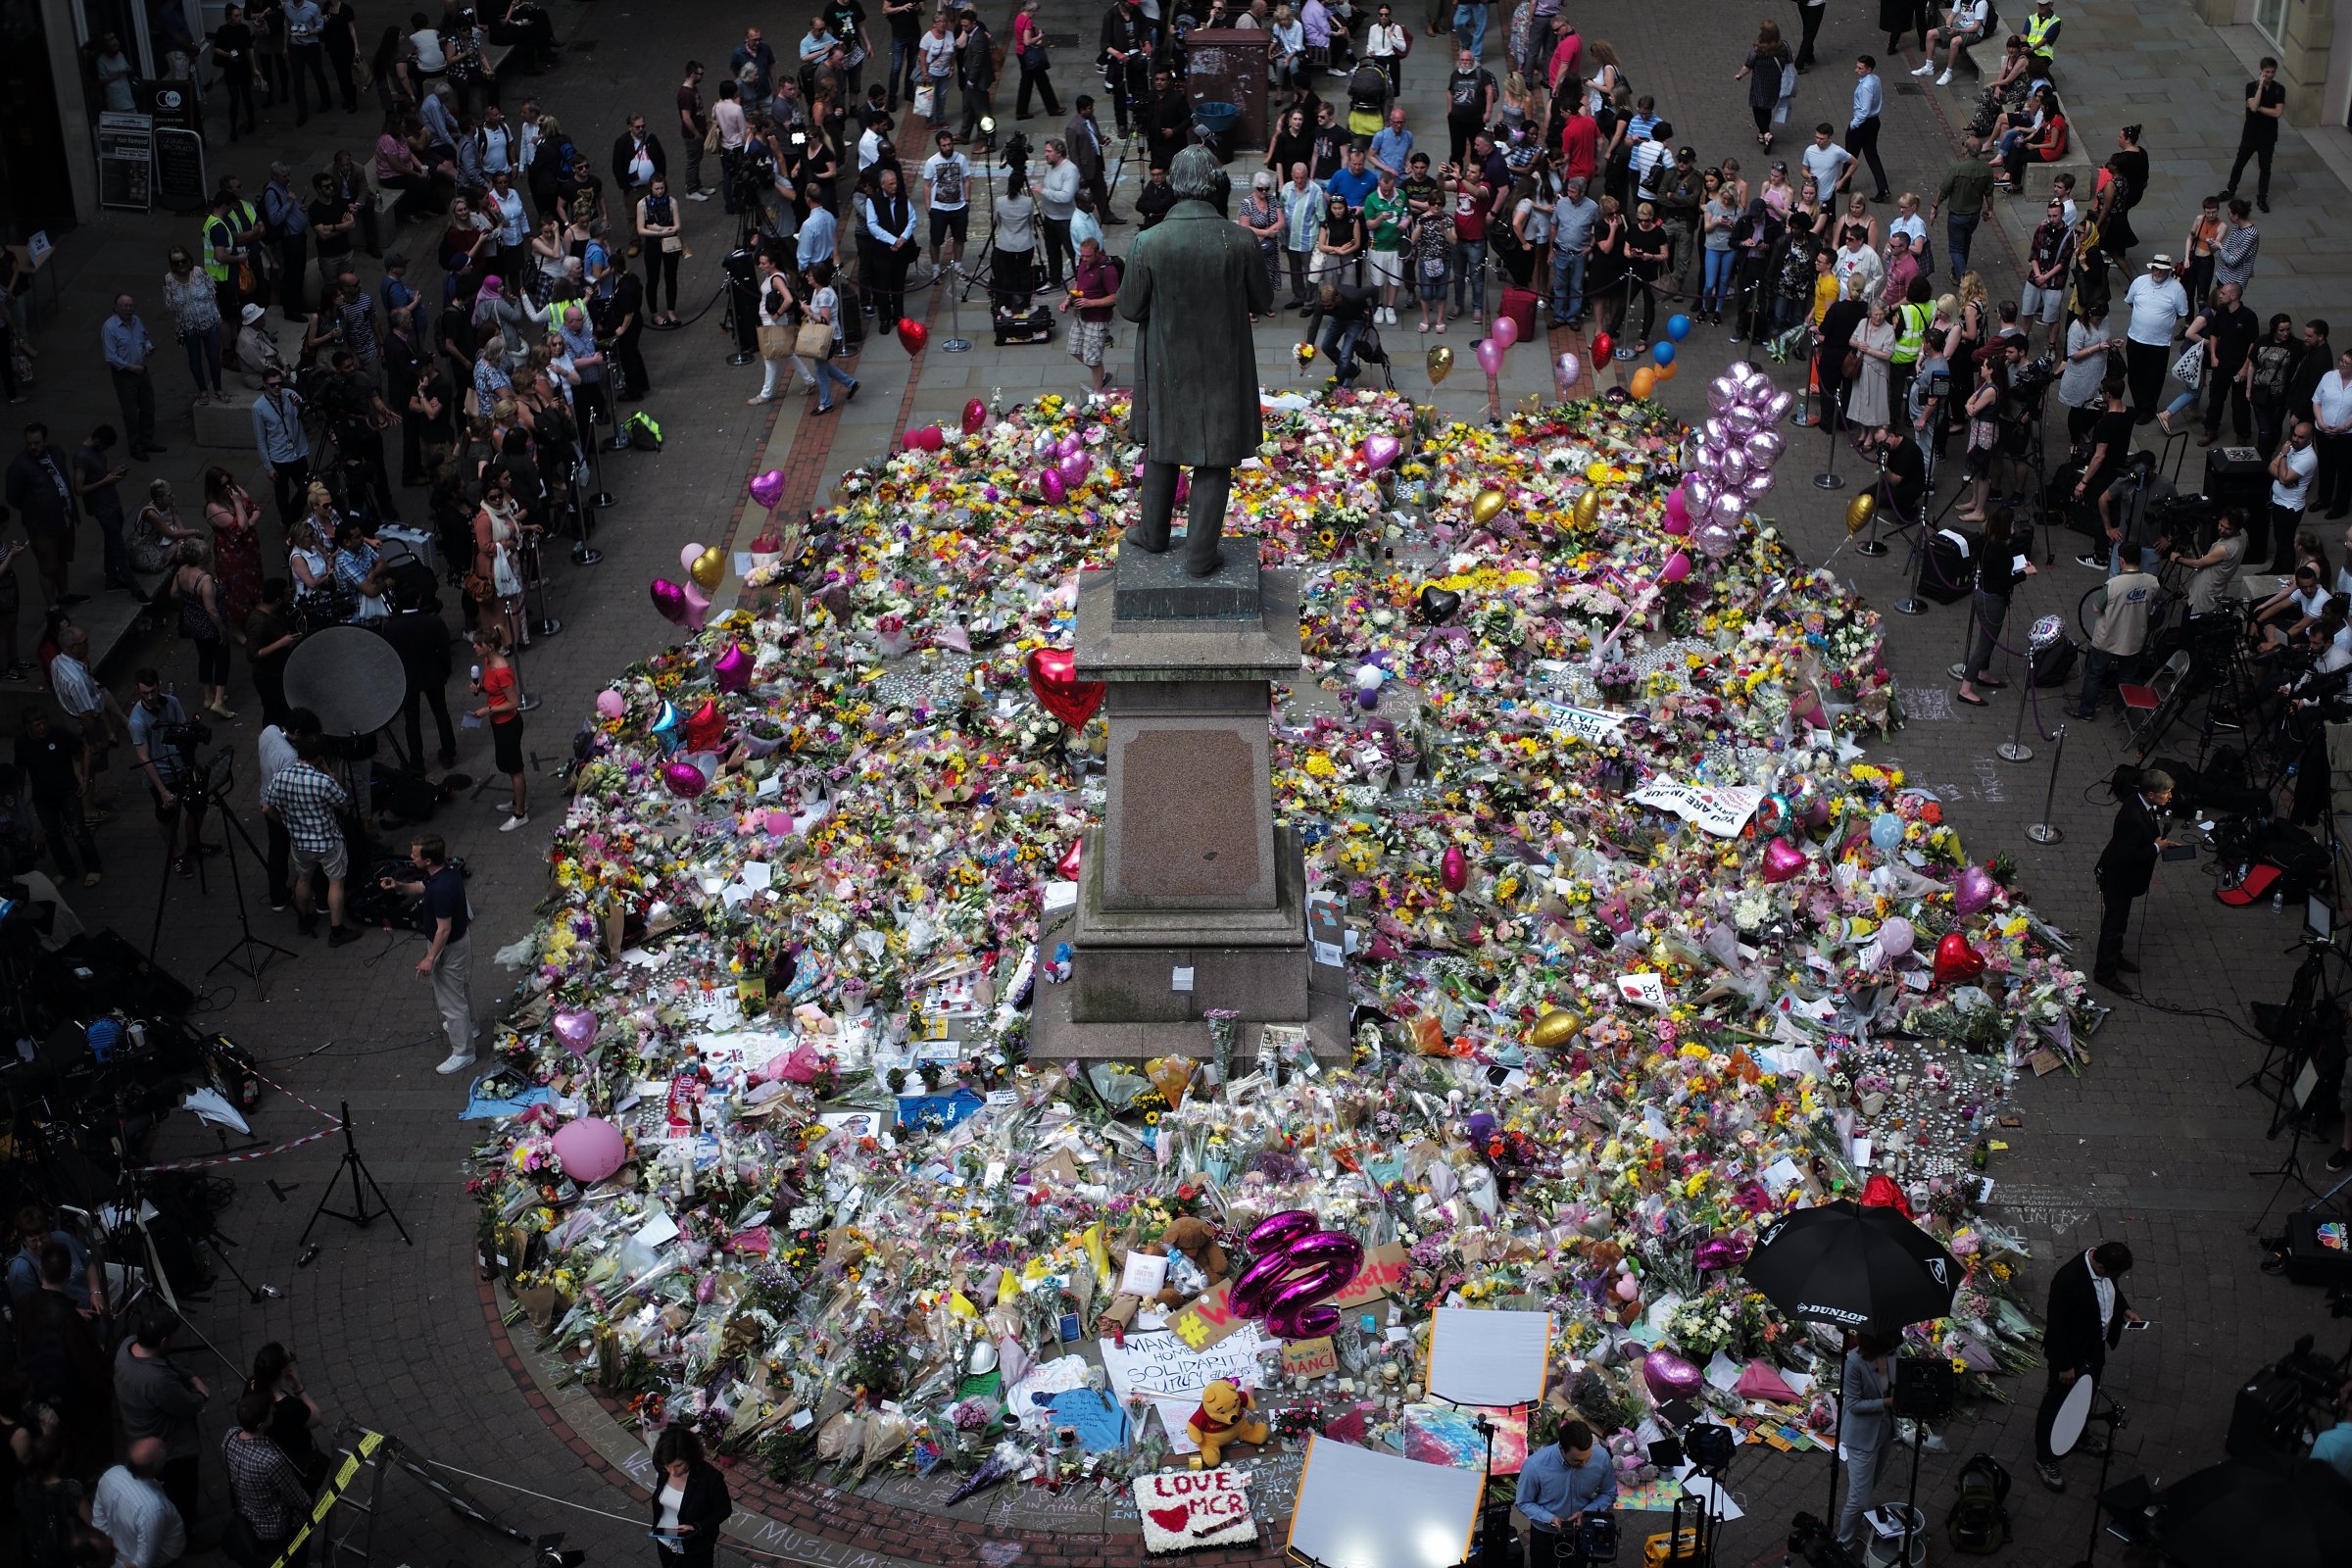 The carpet of floral tributes to the victims and injured of the Manchester Arena bombing covers the ground in St Ann's Square on May 25, 2017 in Manchester, England.